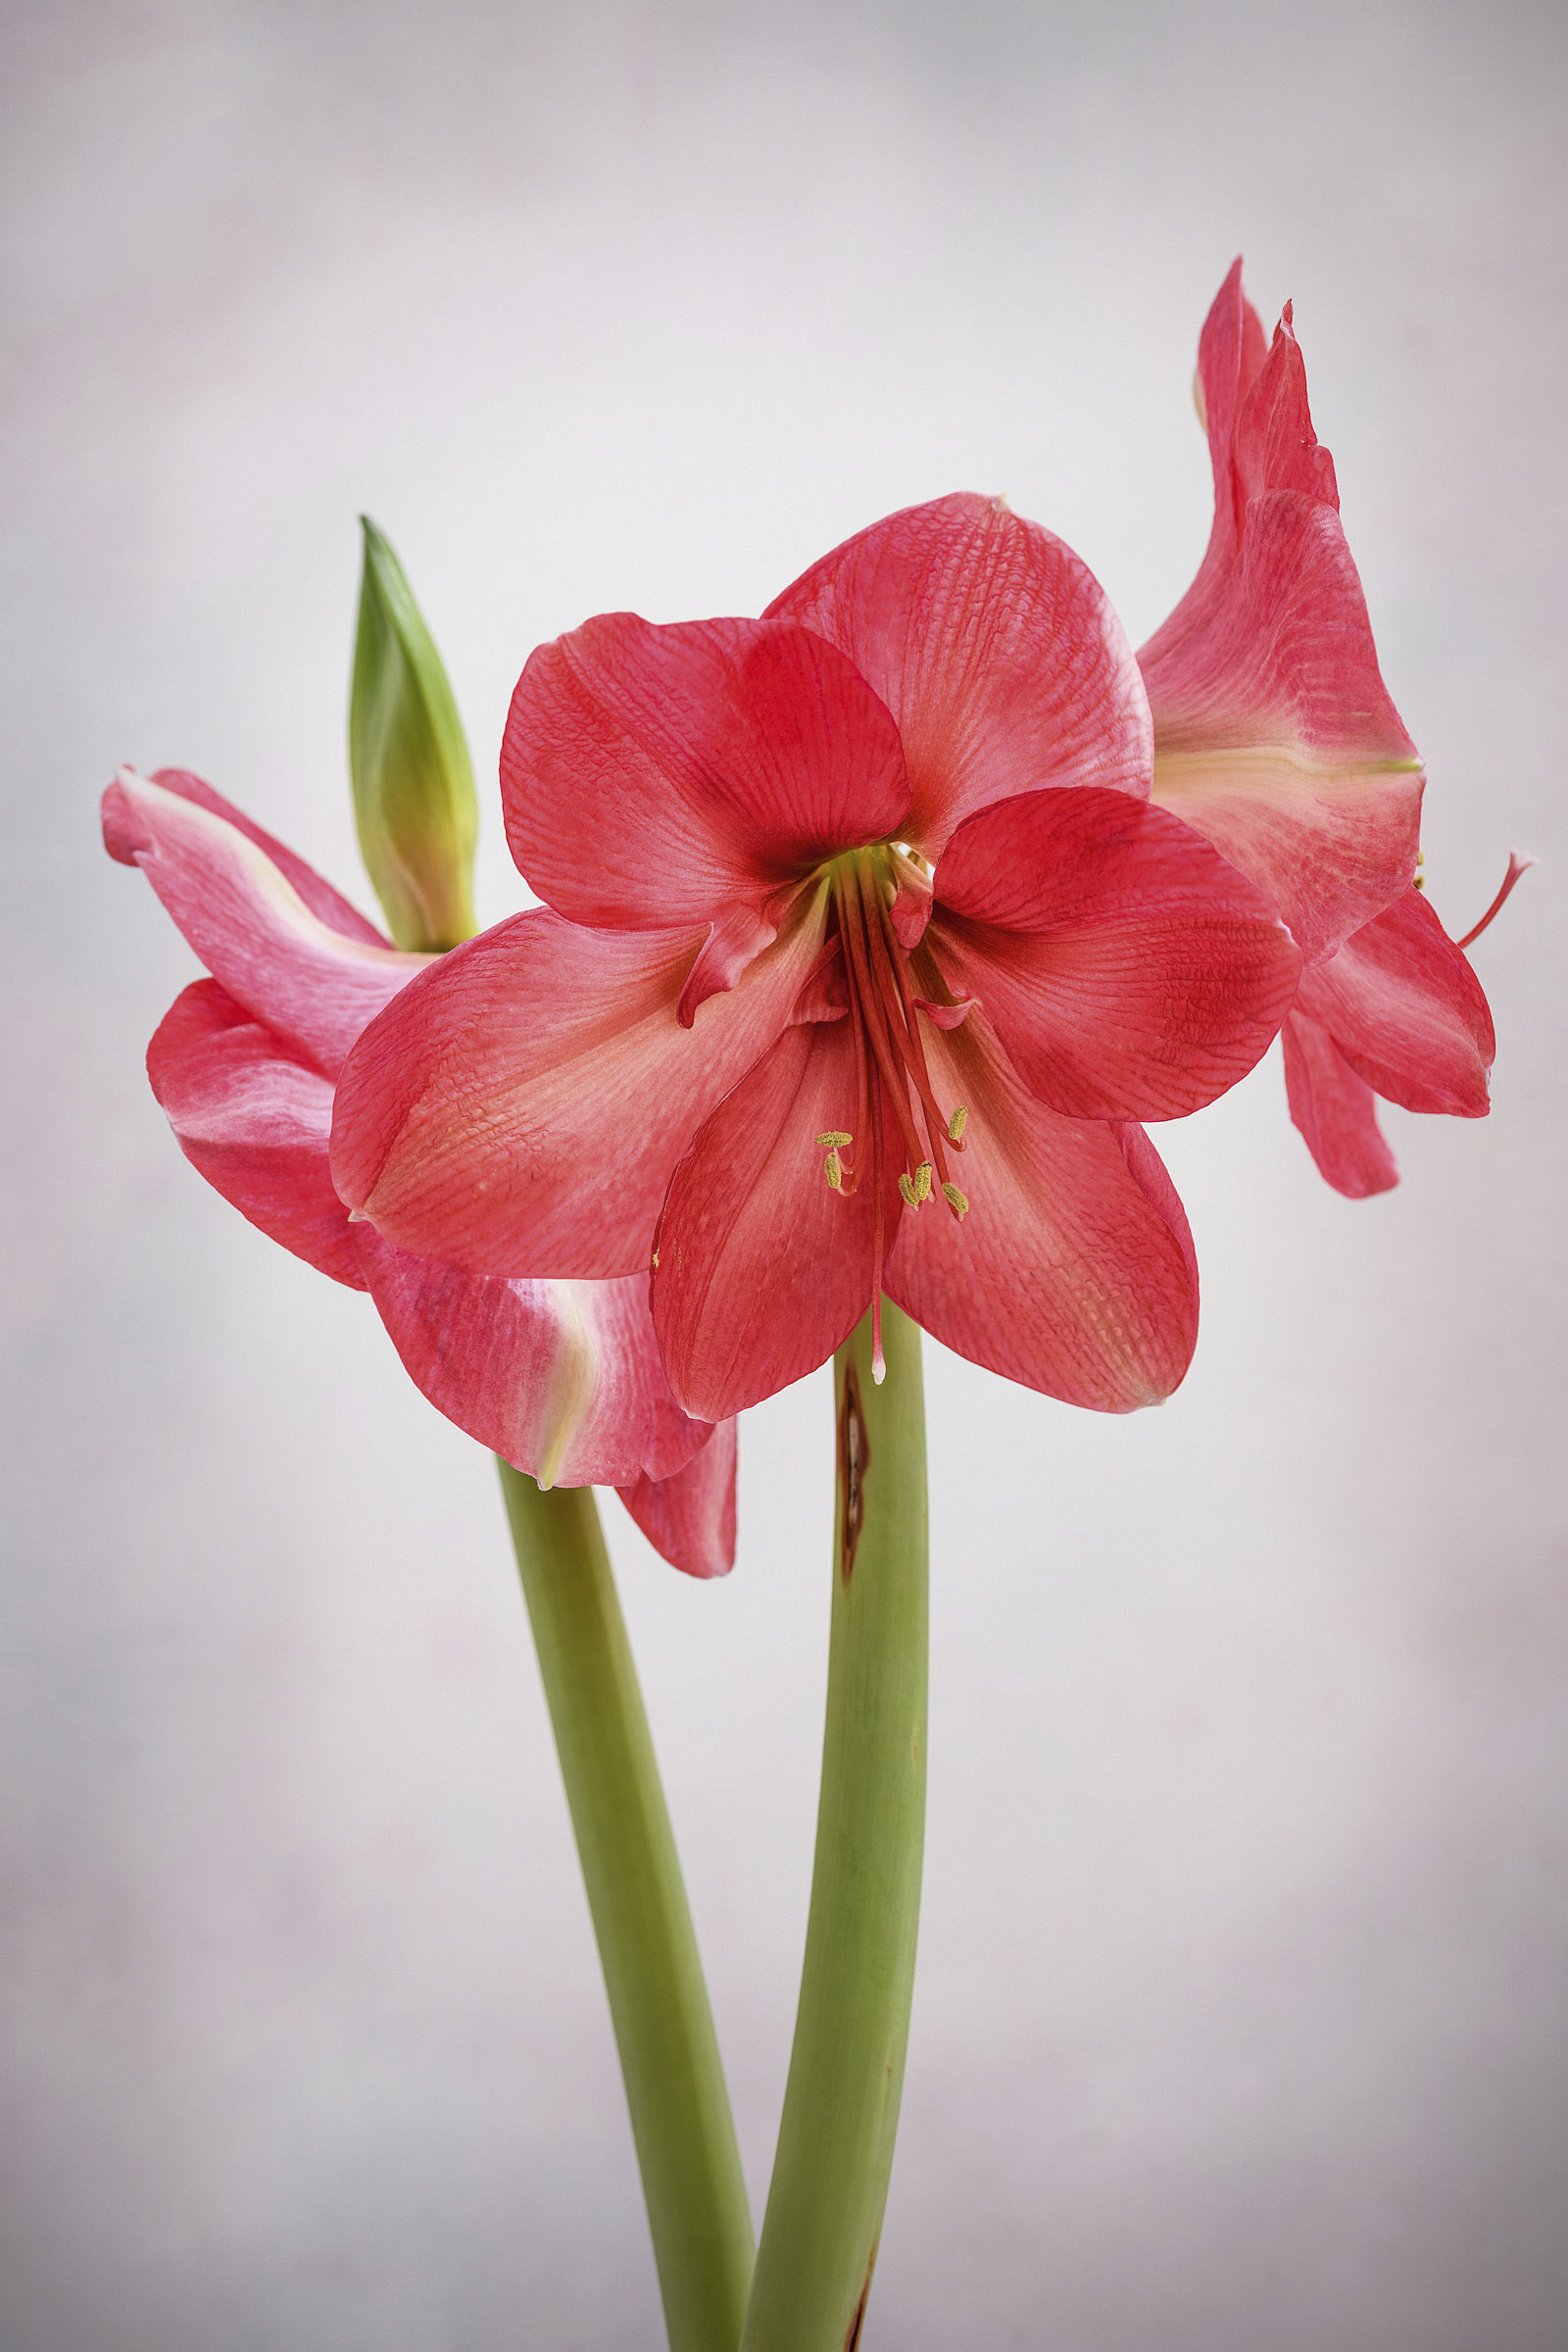 Hippeastrum How To Care For And Keep